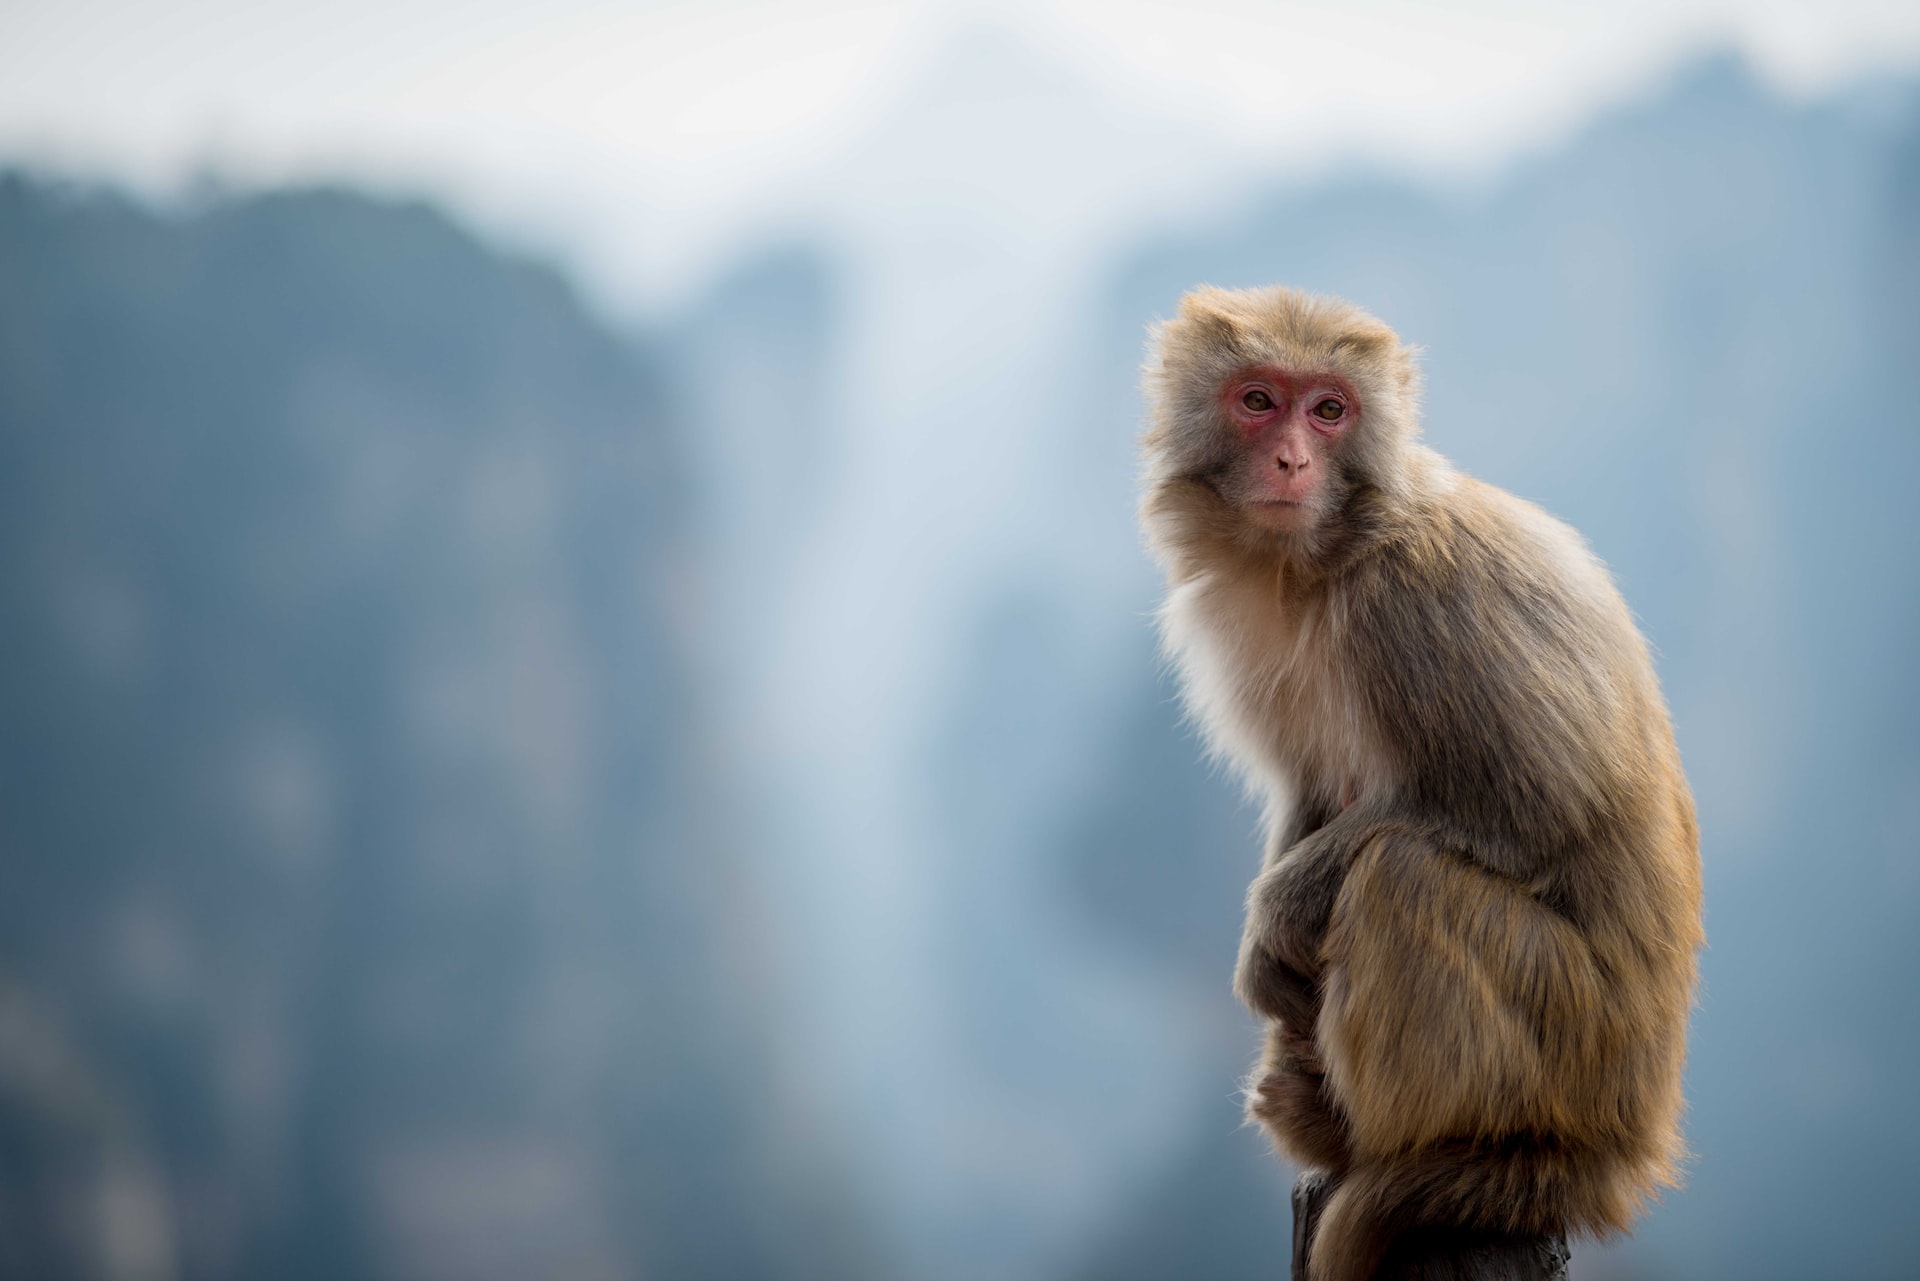 Monkey Magic: The Fascinating World of the Diverse and Omnivorous Primate